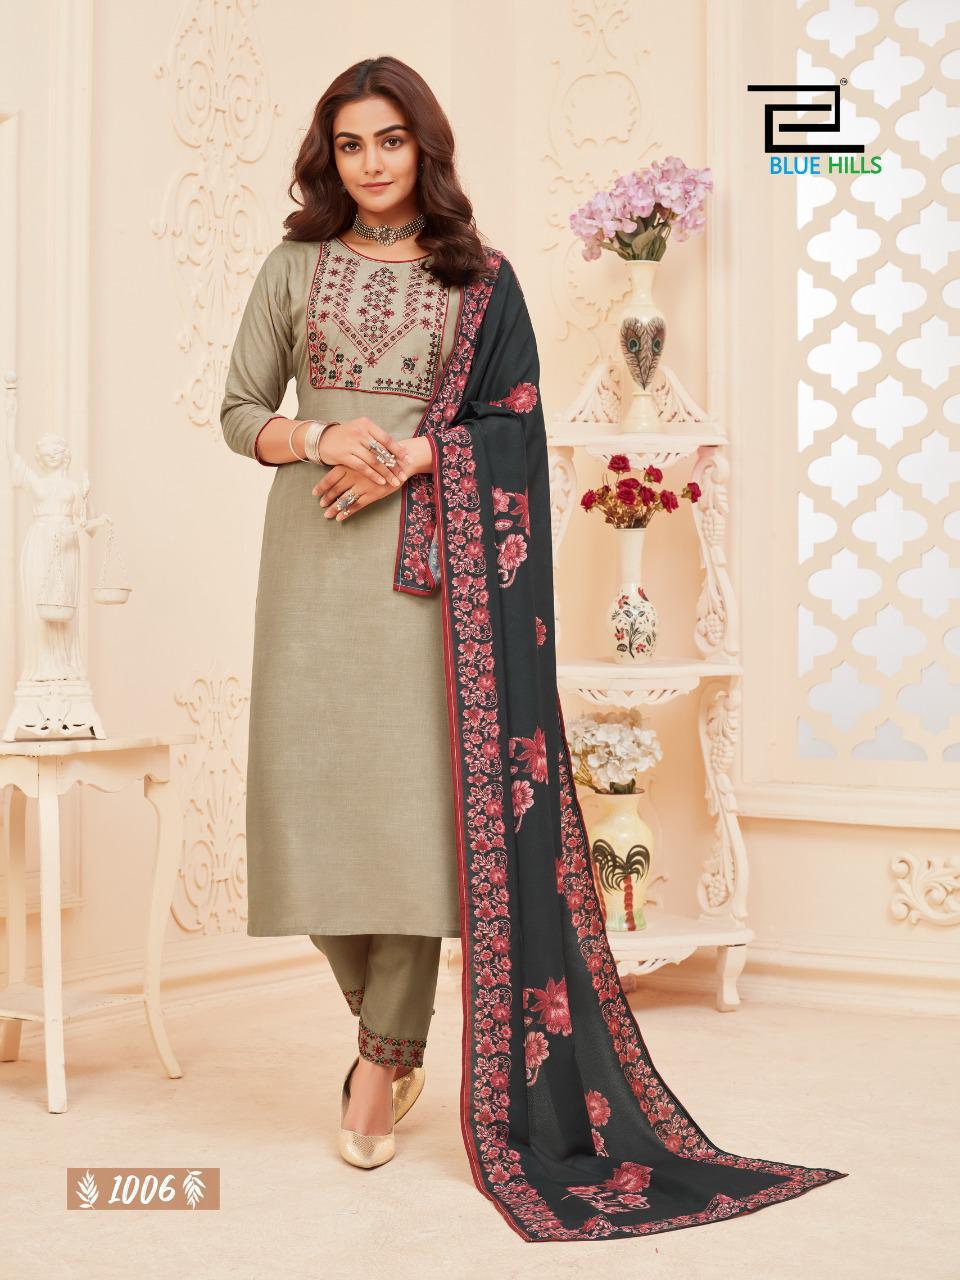 15 Beautiful Embroidered Salwar Suits - Trending Designs